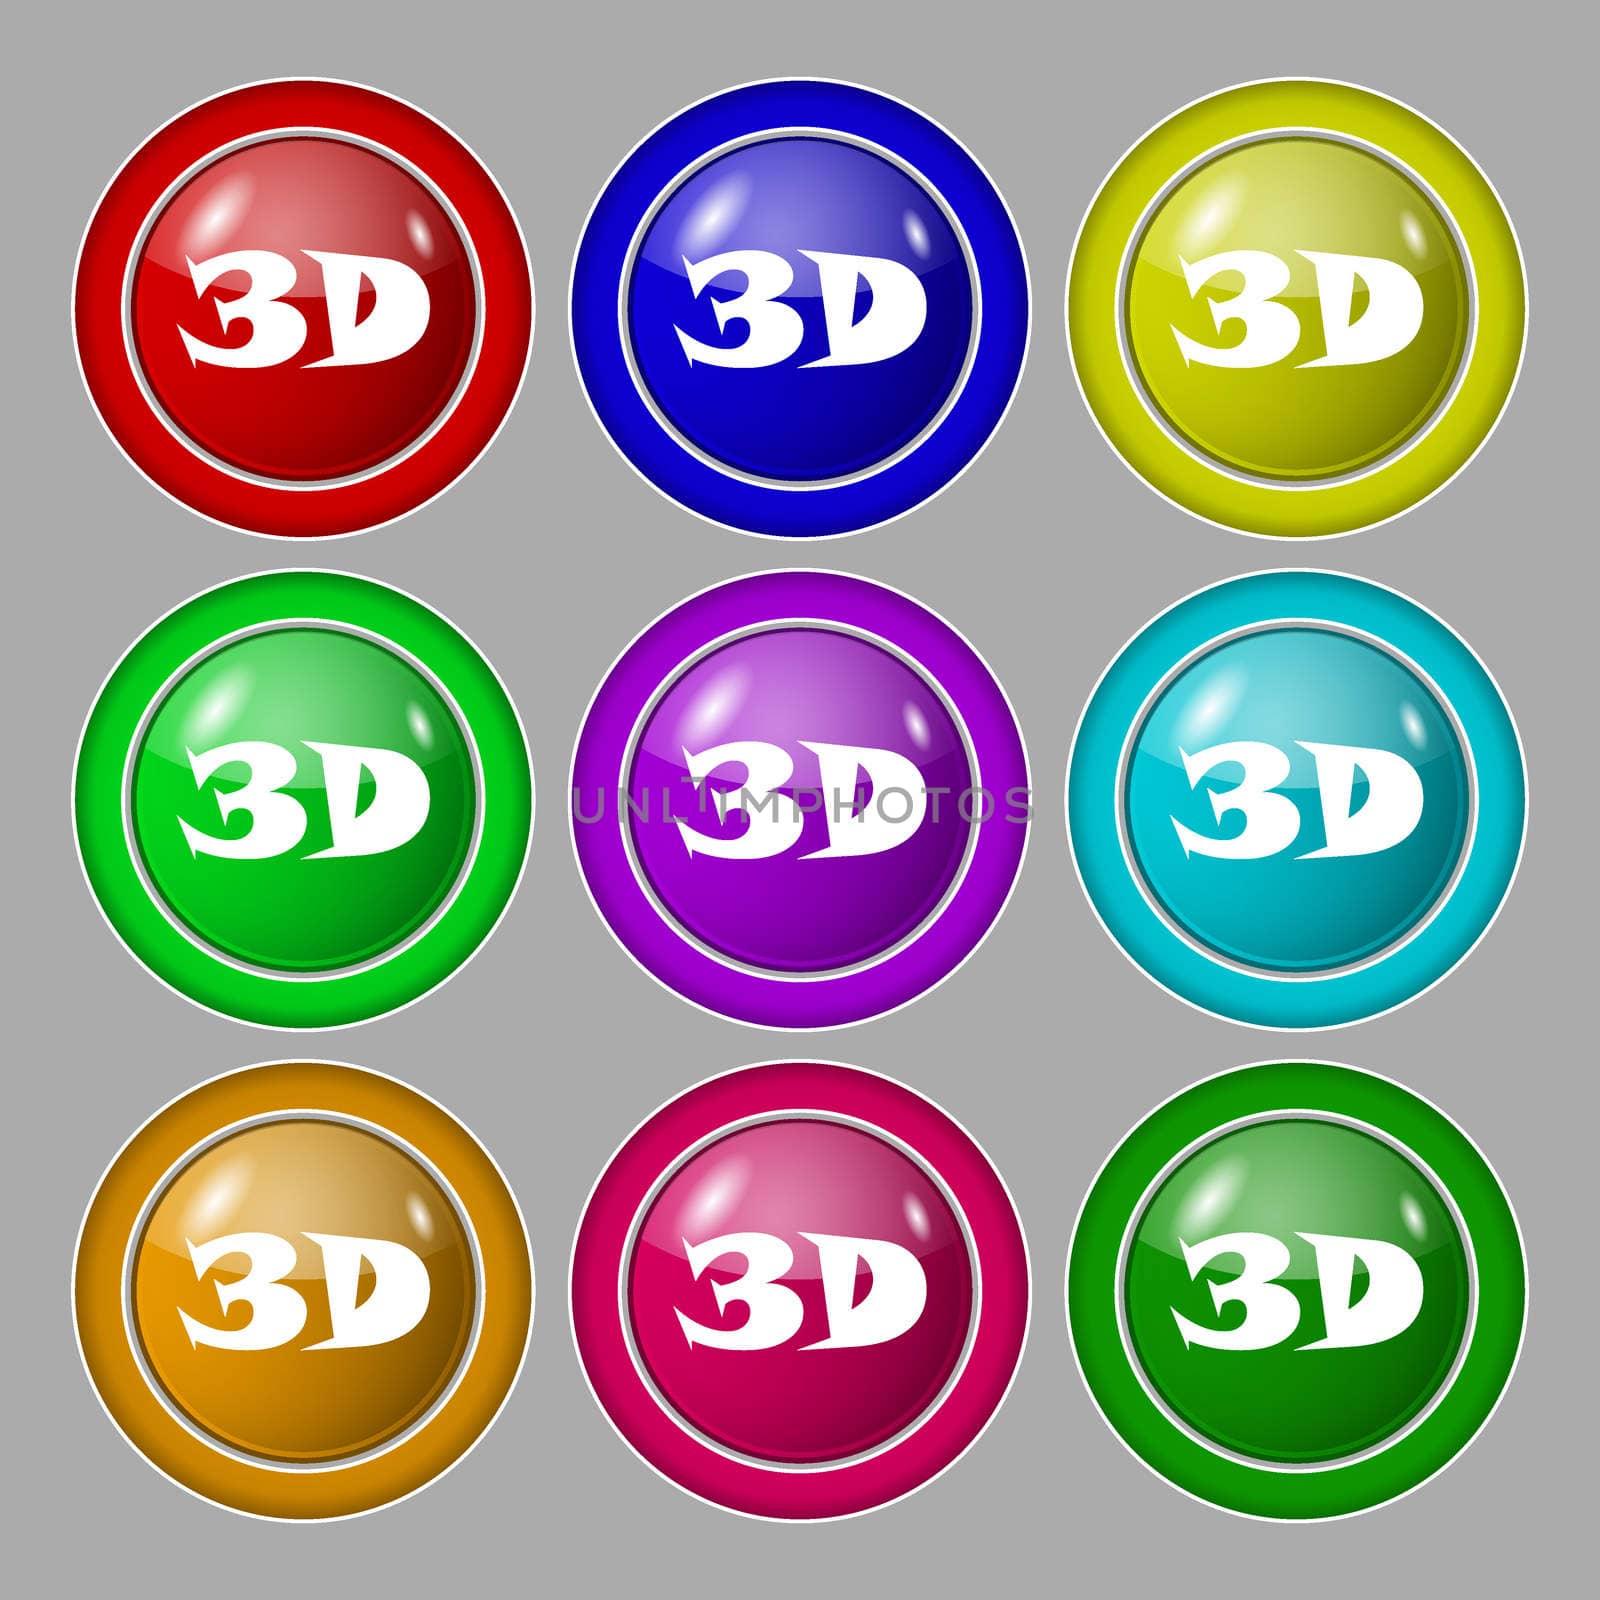 3D sign icon. 3D New technology symbol. Symbol on nine round colourful buttons. illustration